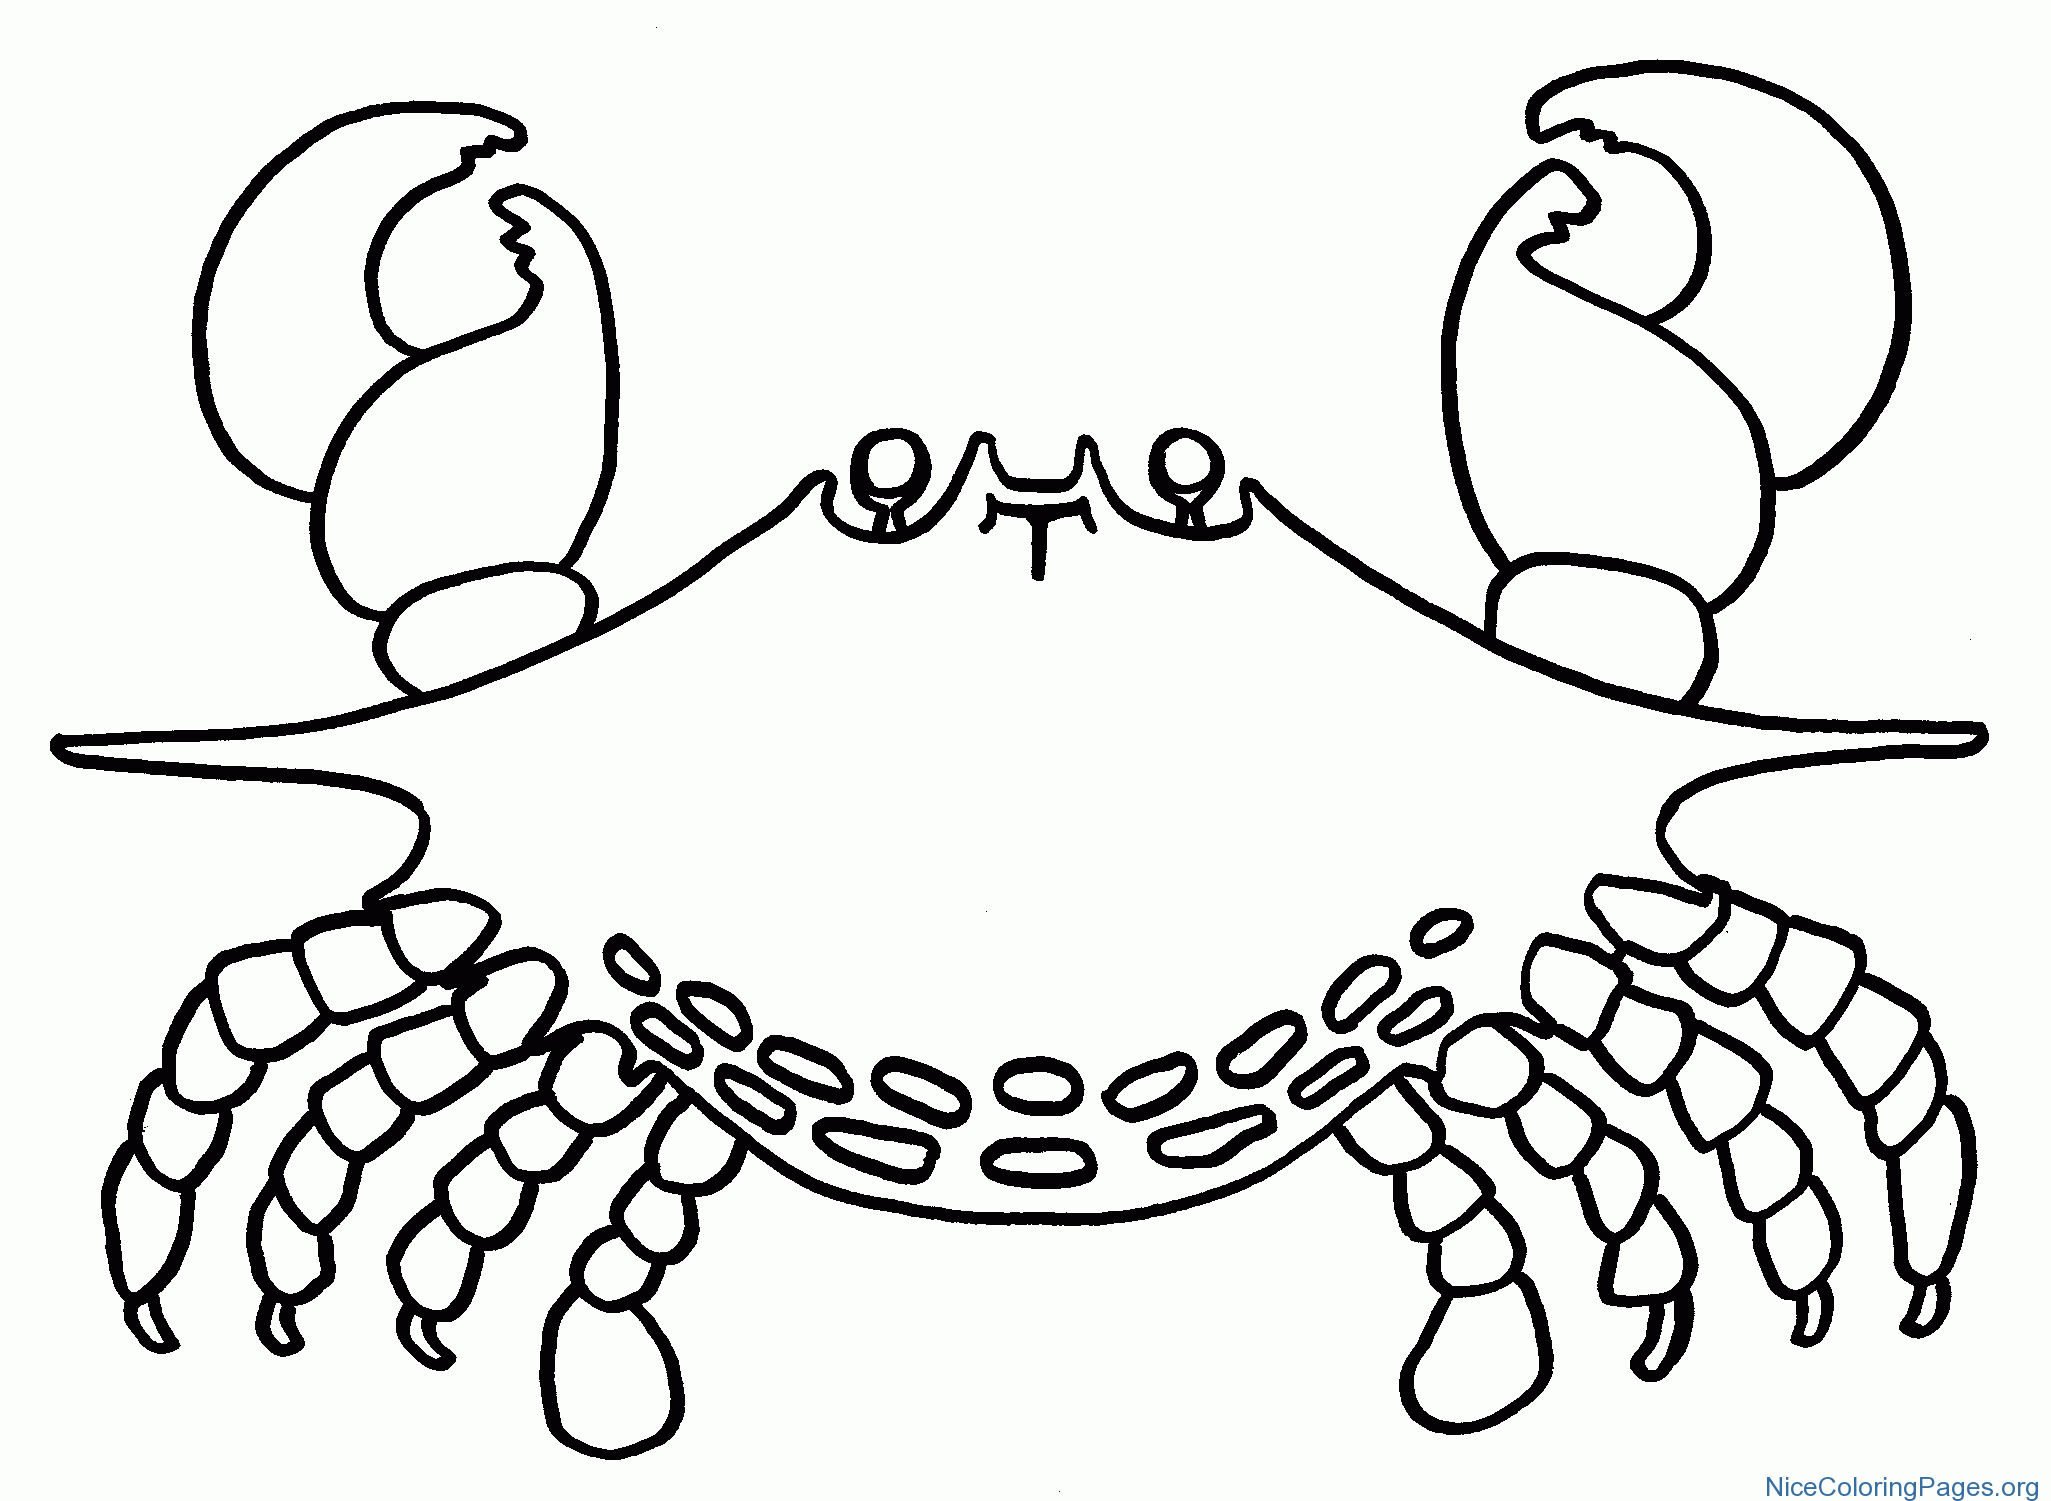 Horseshoe Crab Coloring Pages | Nice Coloring Pages For Kids - Free Printable Horseshoe Coloring Pages